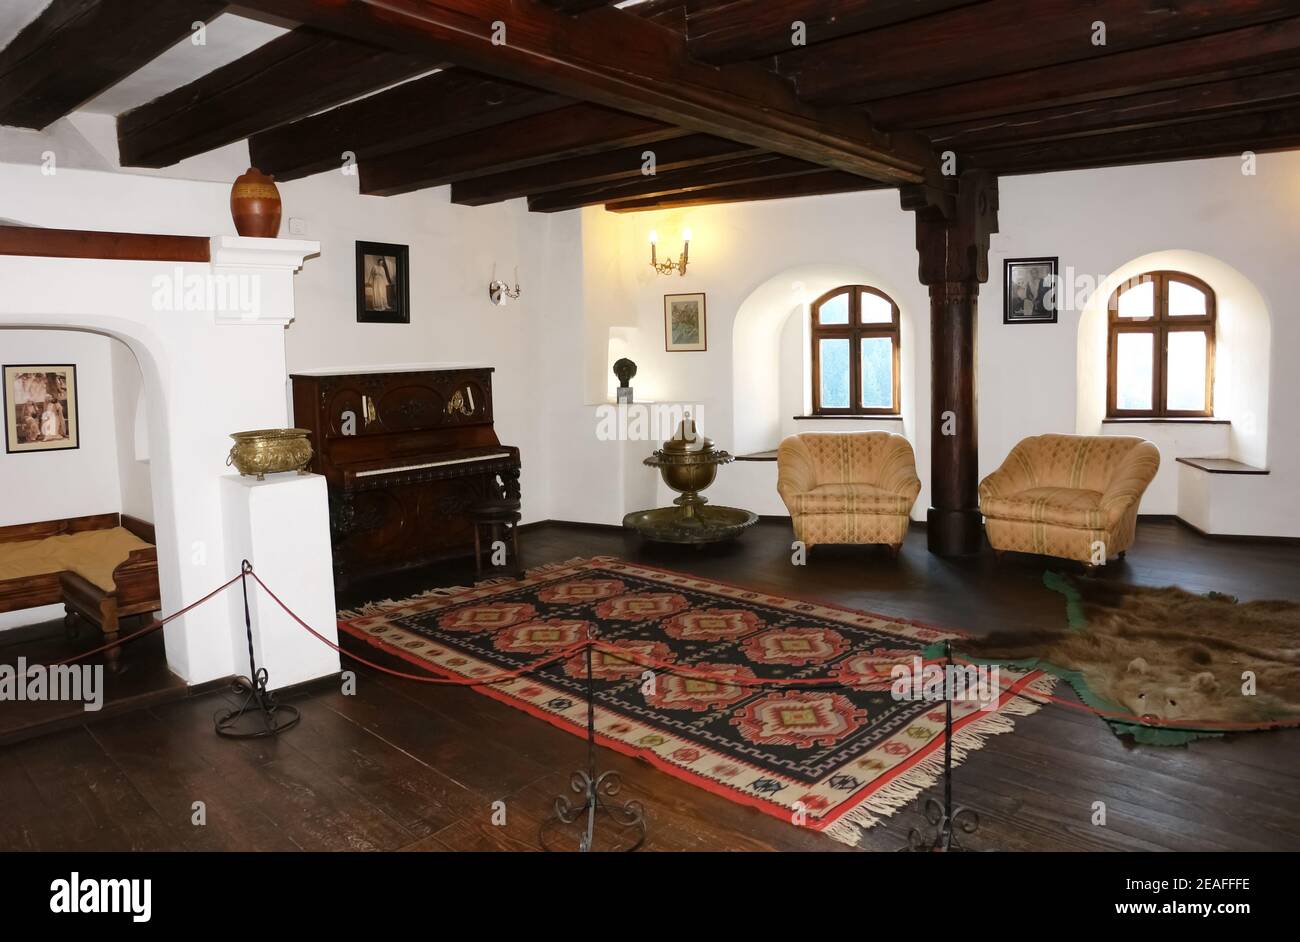 The interior of a large room in an old castle with two windows, carved wooden furniture, a piano and two armchairs. Stock Photo